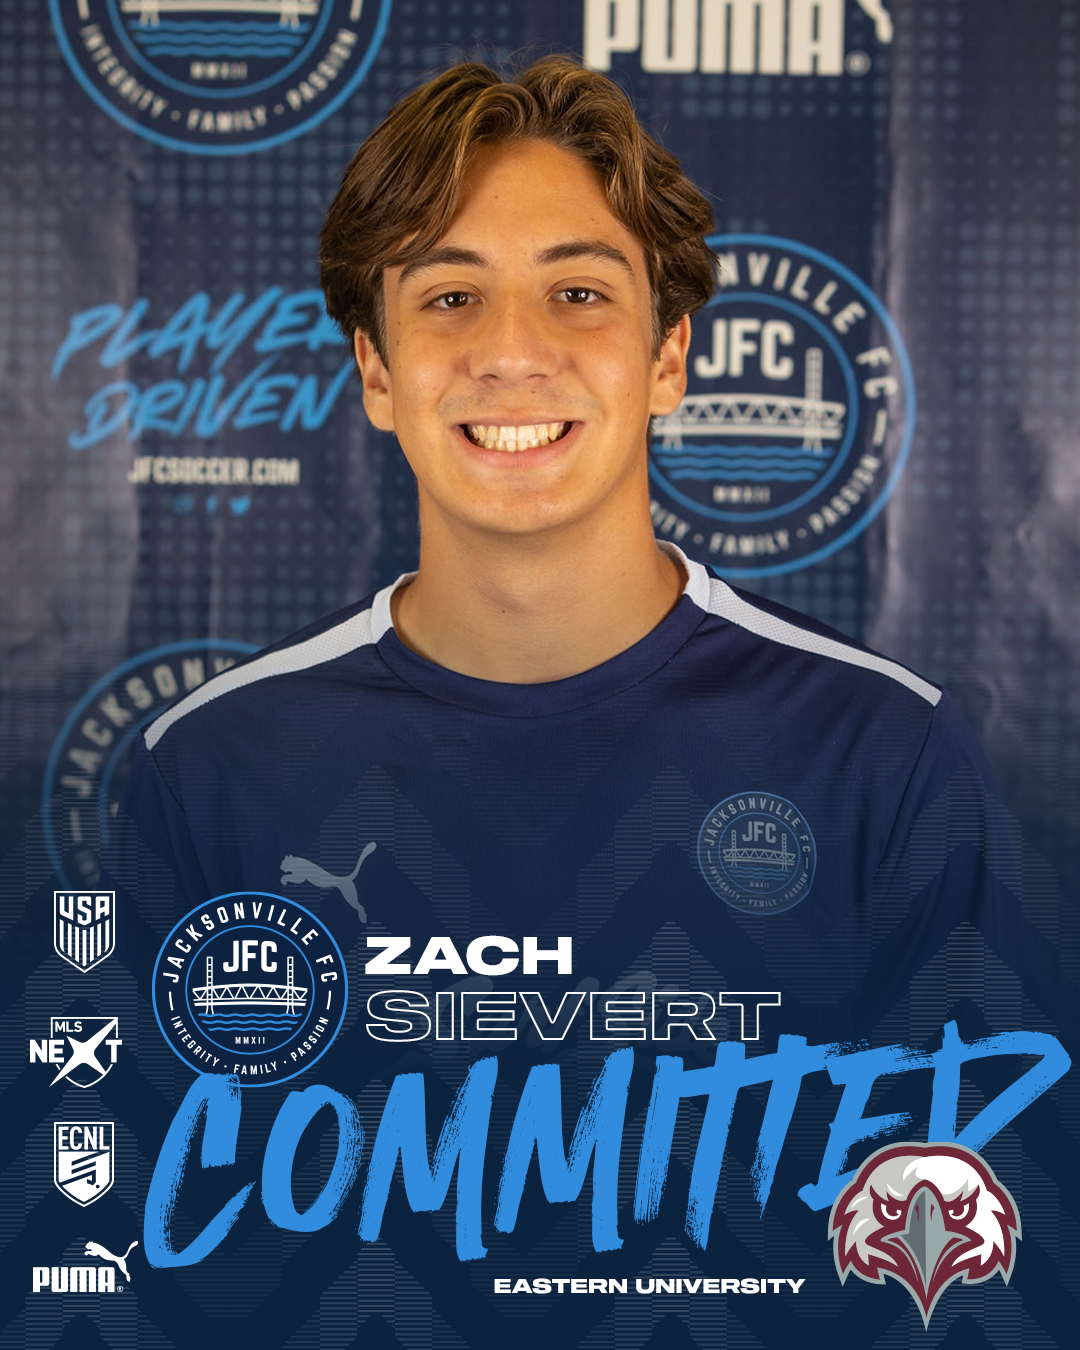 JFC_Committed_ZachSievert_IG_042723.png